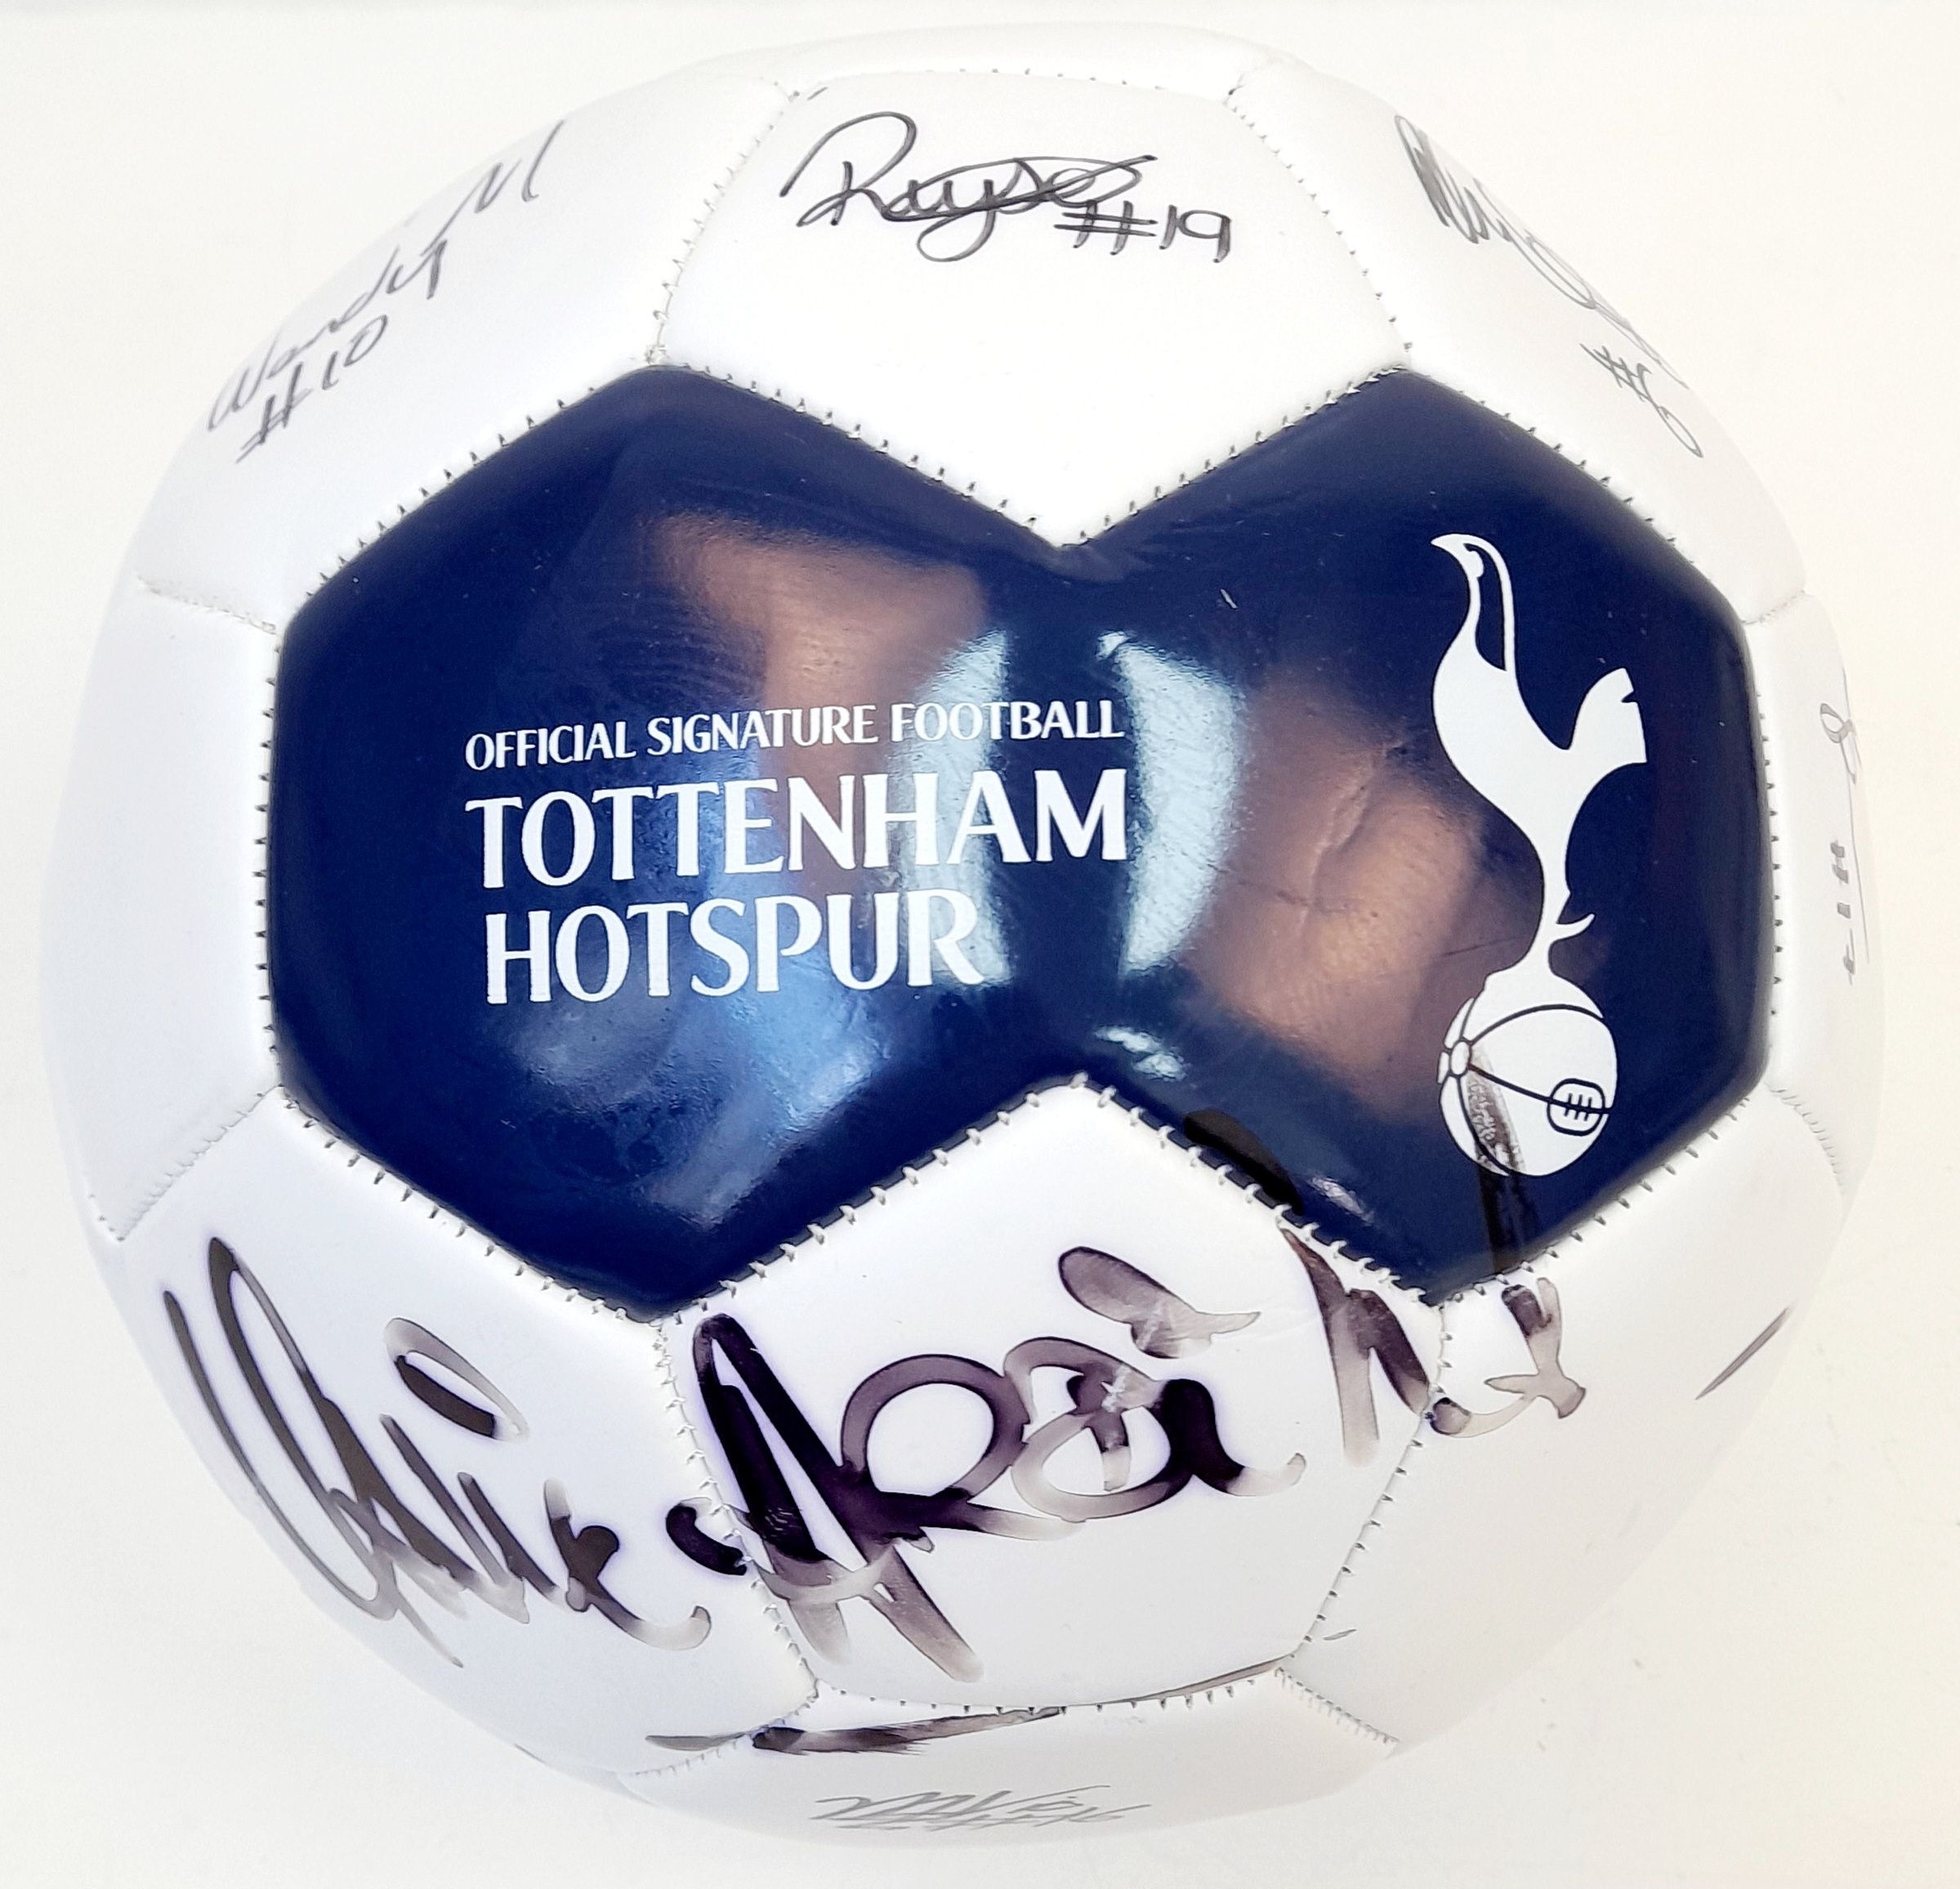 A Tottenham FC Official Signature Signed Football - Spurs Ladies! - Image 2 of 5